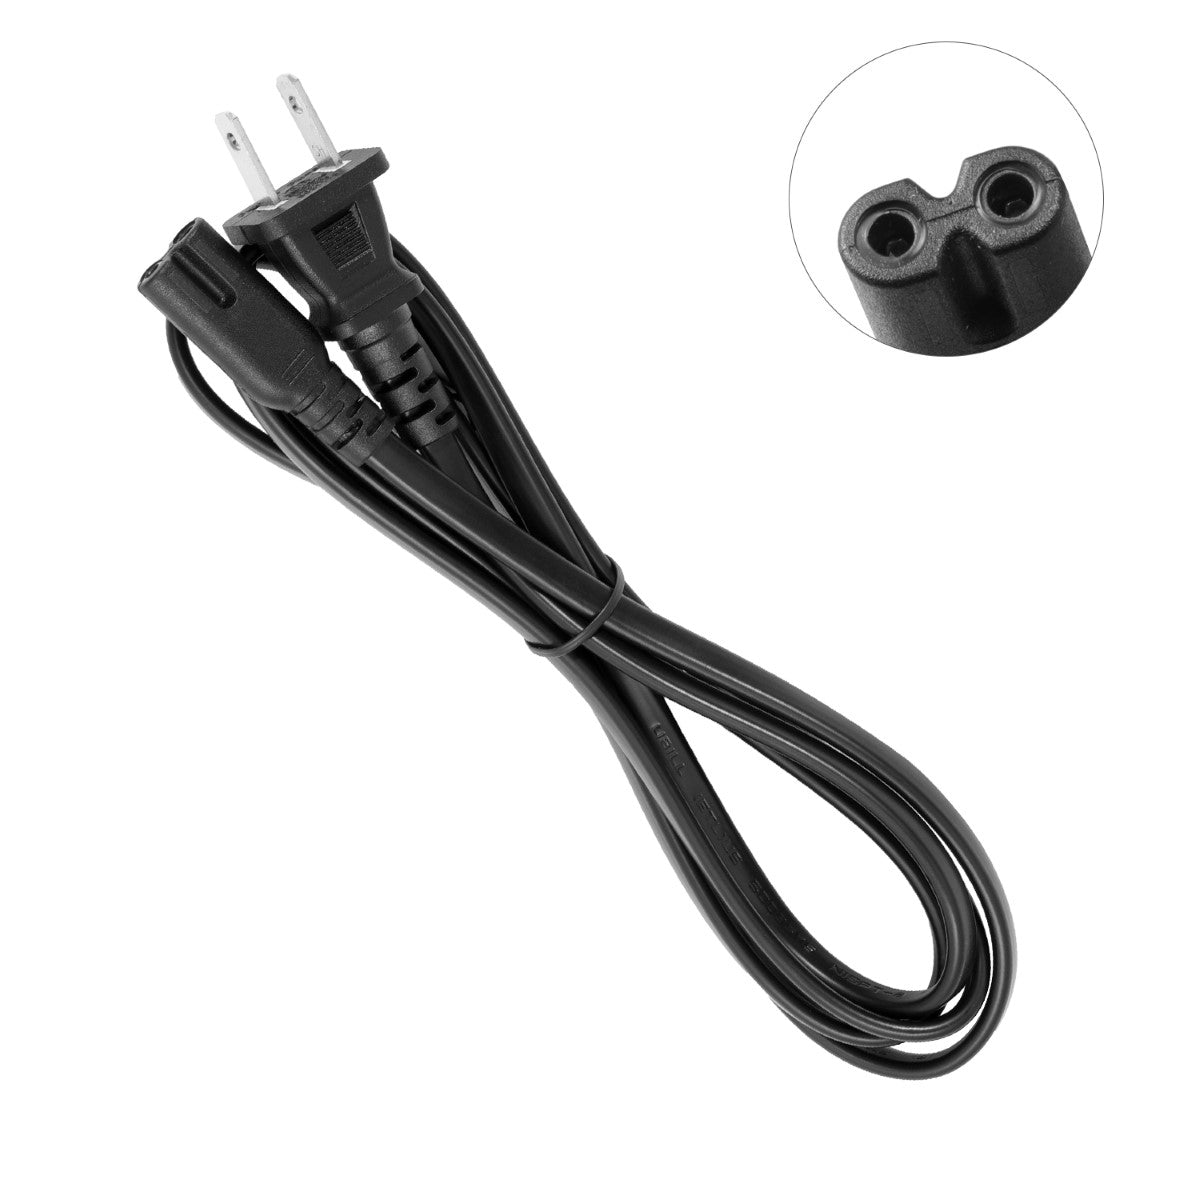 Power Cable for HP ENVY Photo 7120 Printer.